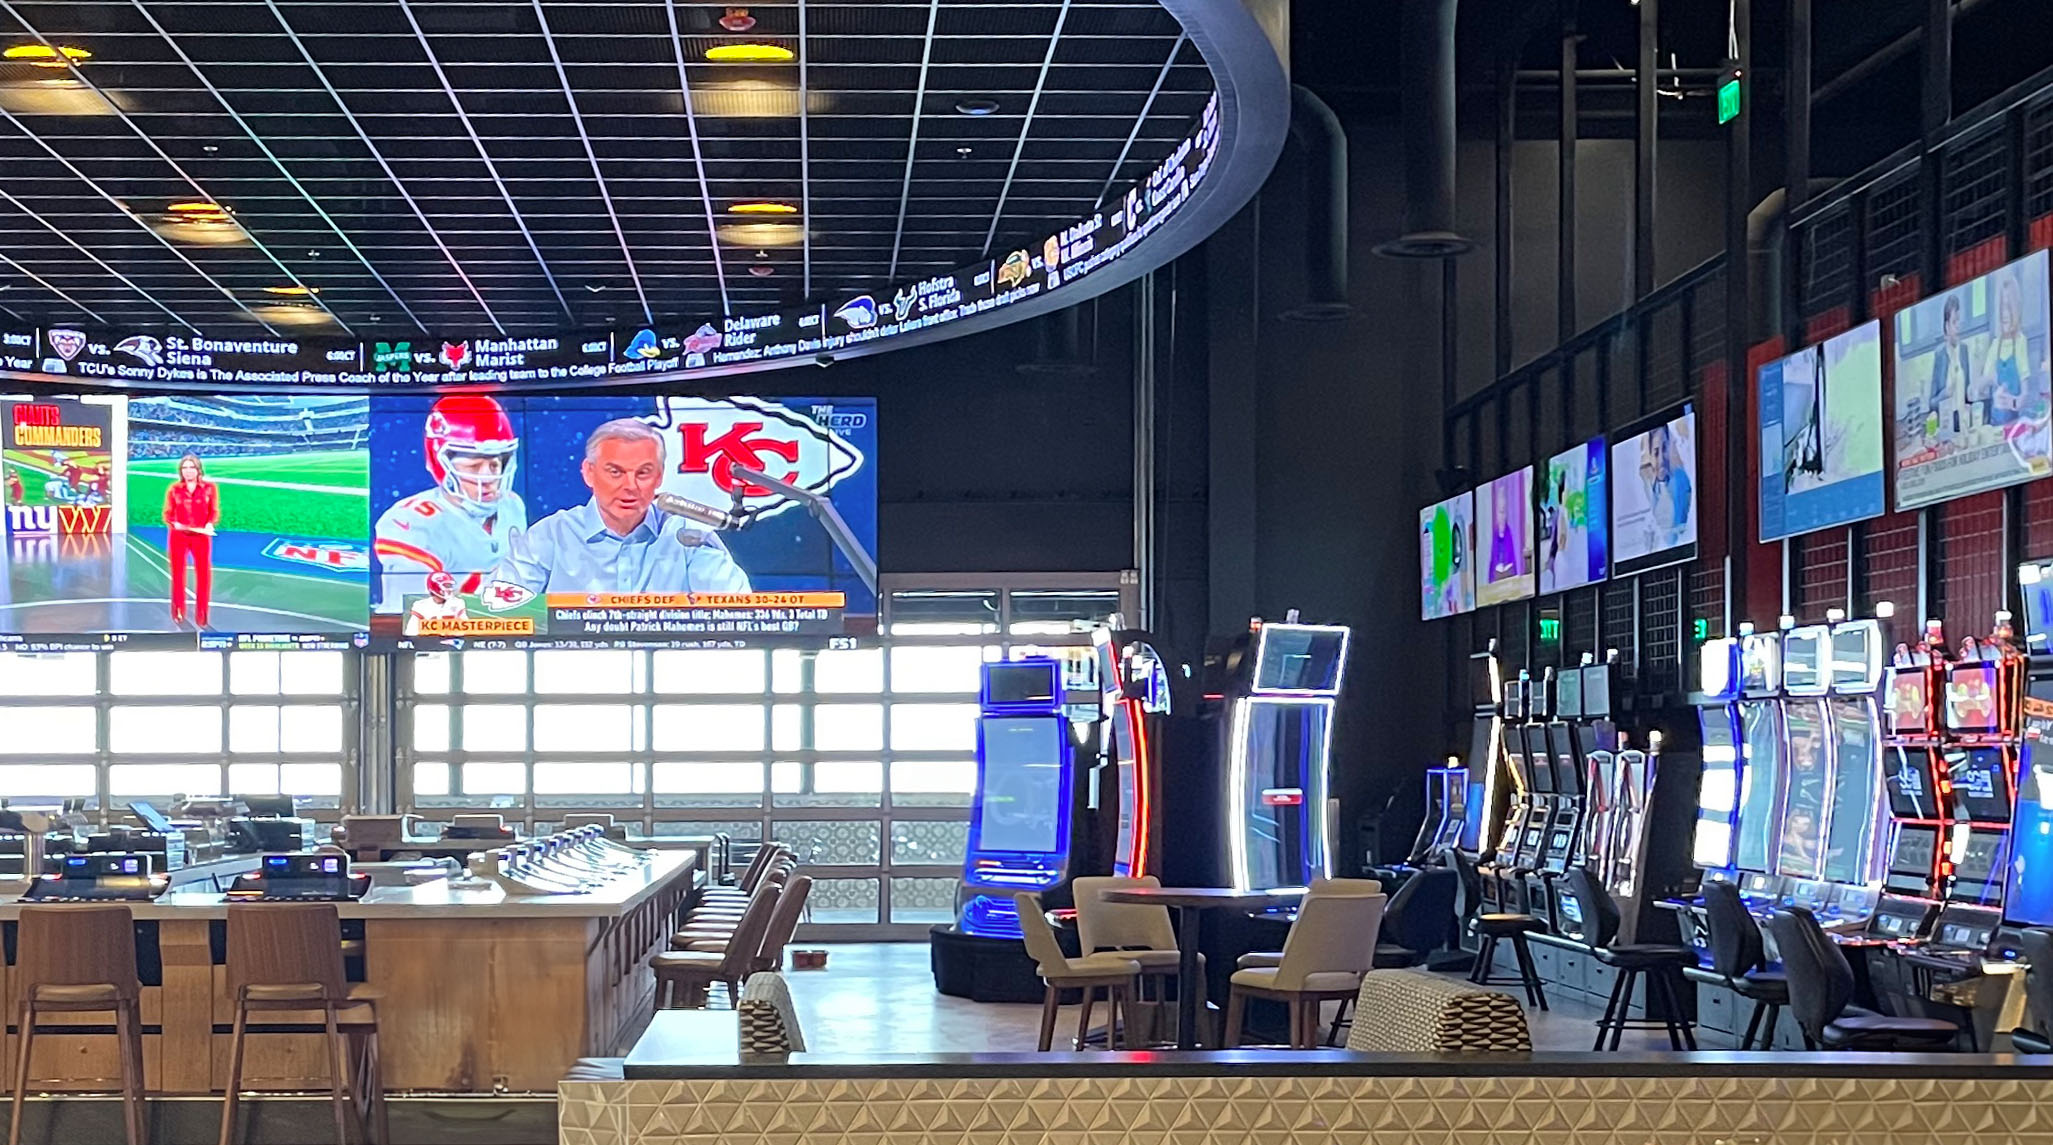 Red Hawk Casino and RGB Spectrum video wall